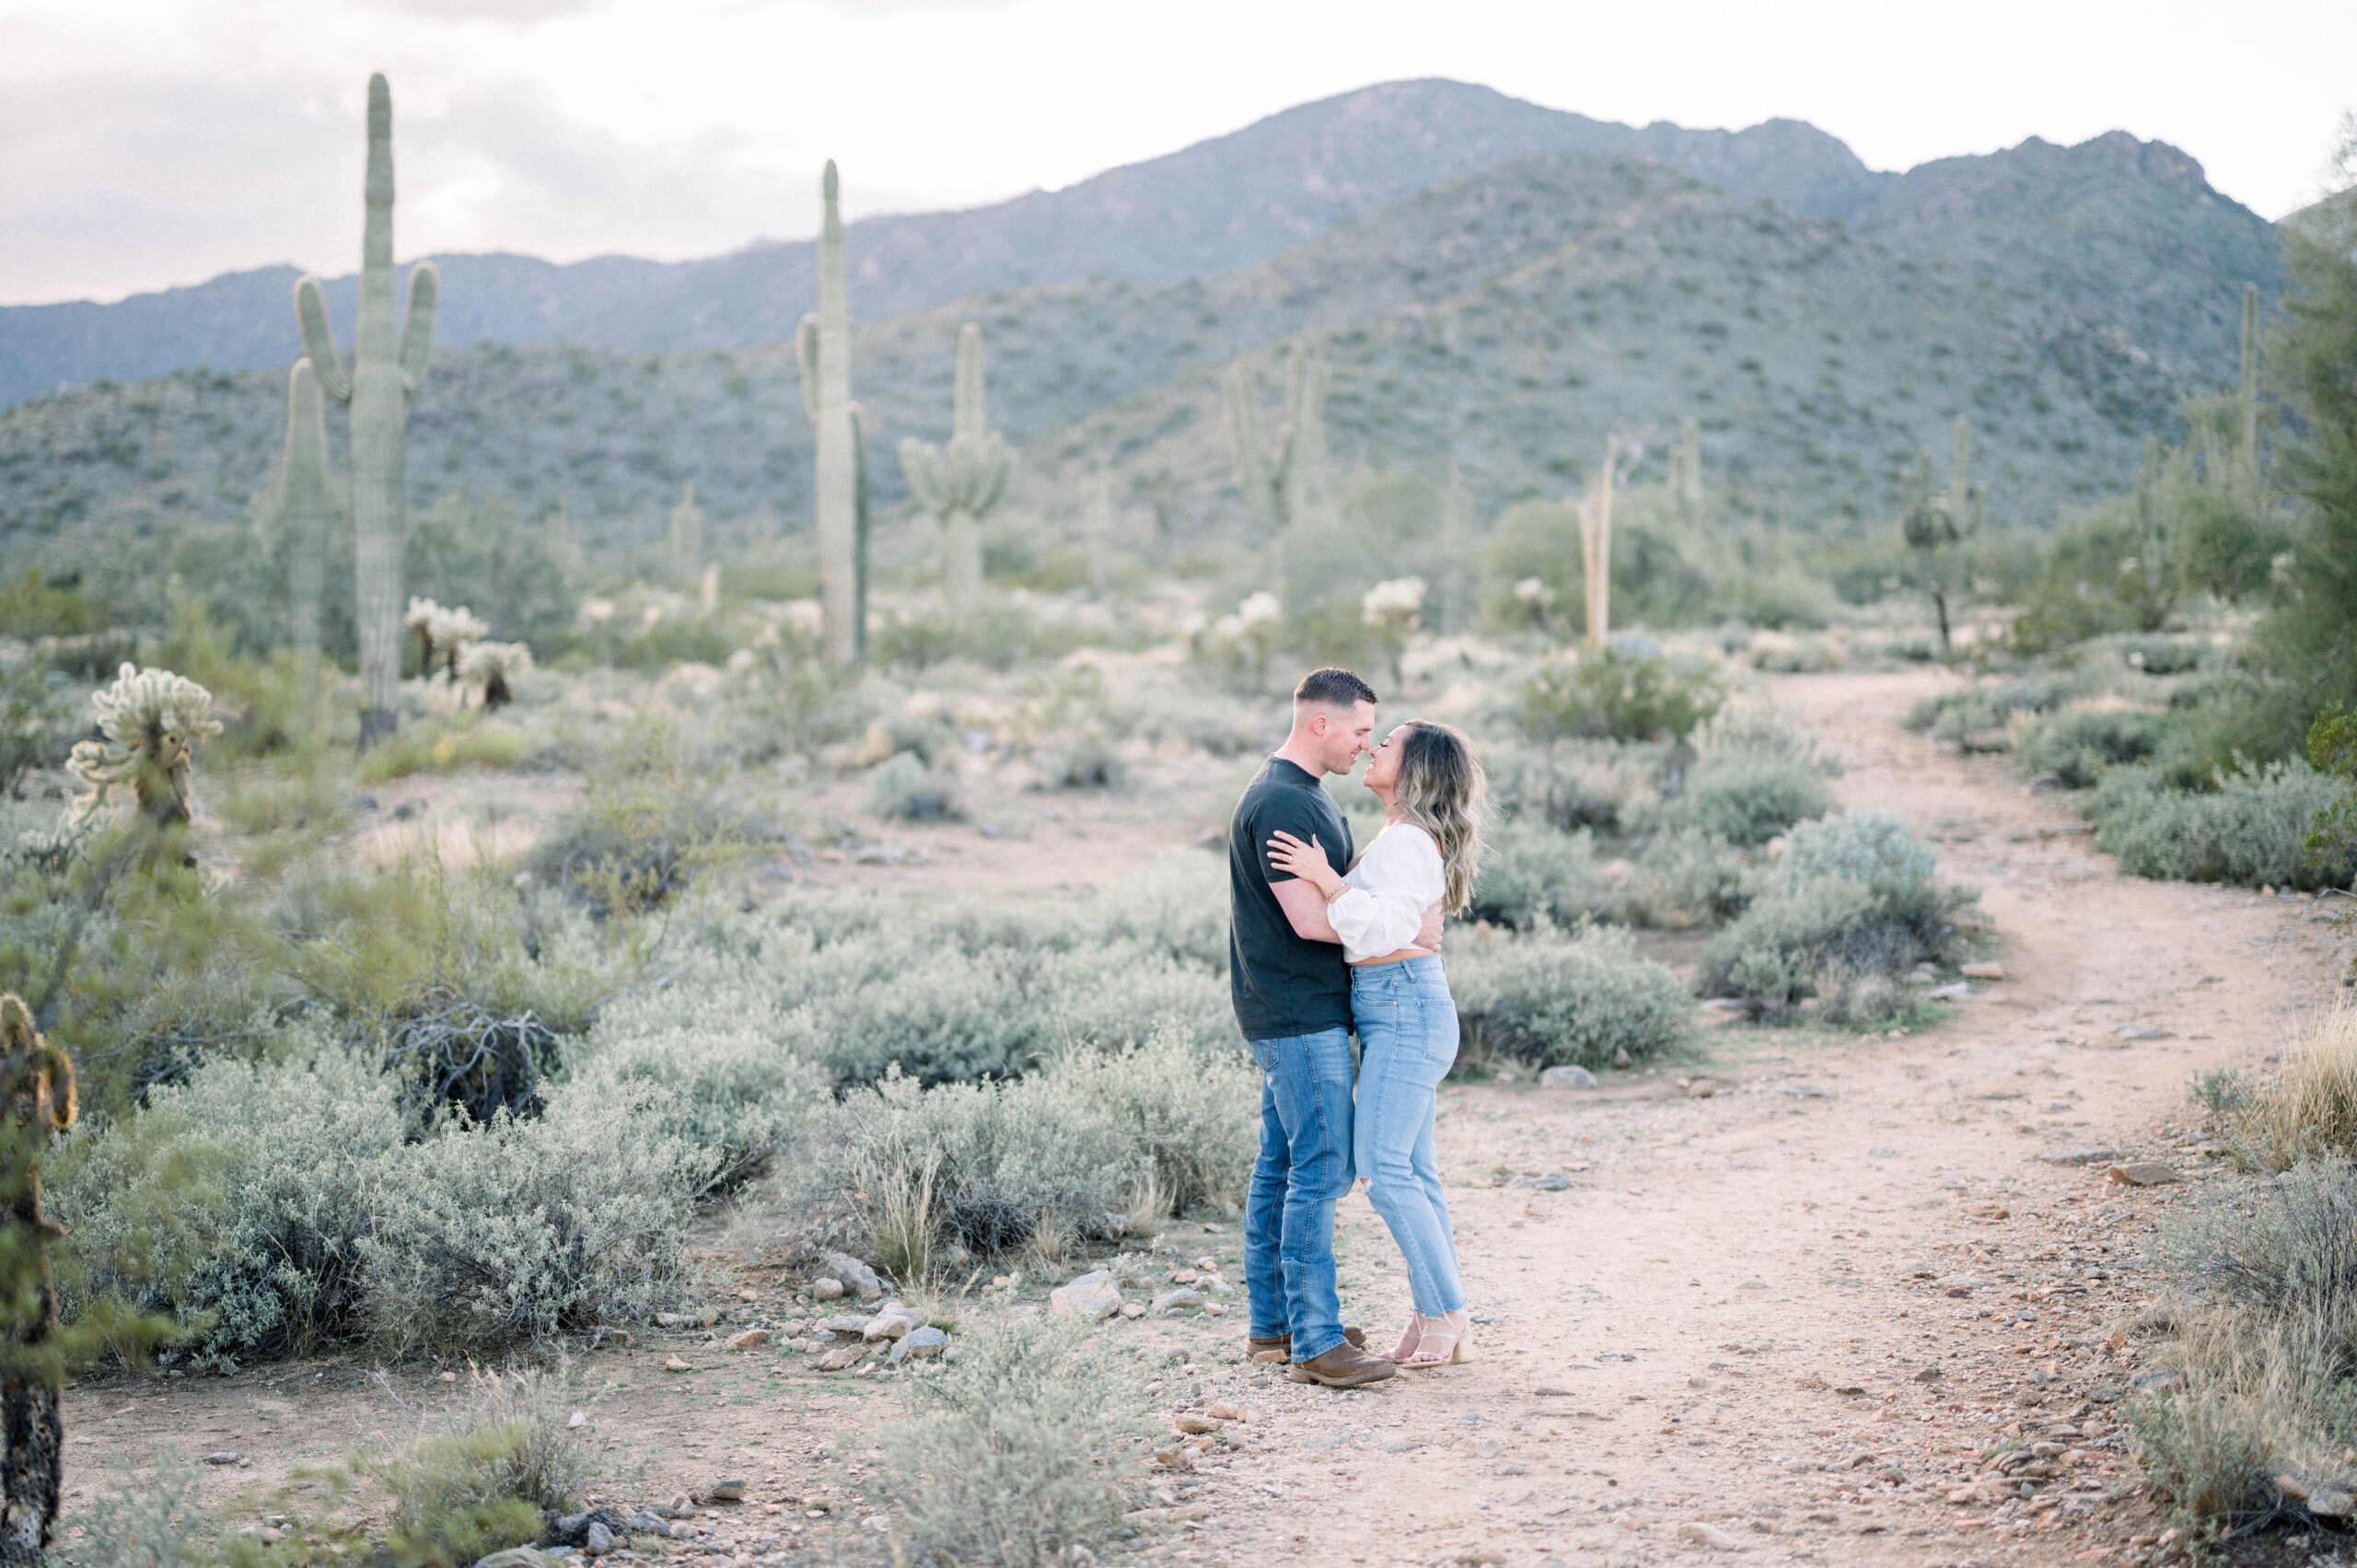 Mariah and Brandons cloudy Arizona desert engagement session was something out of a dream. Out in the beautiful Phoenix desert, we made nothing but magic!